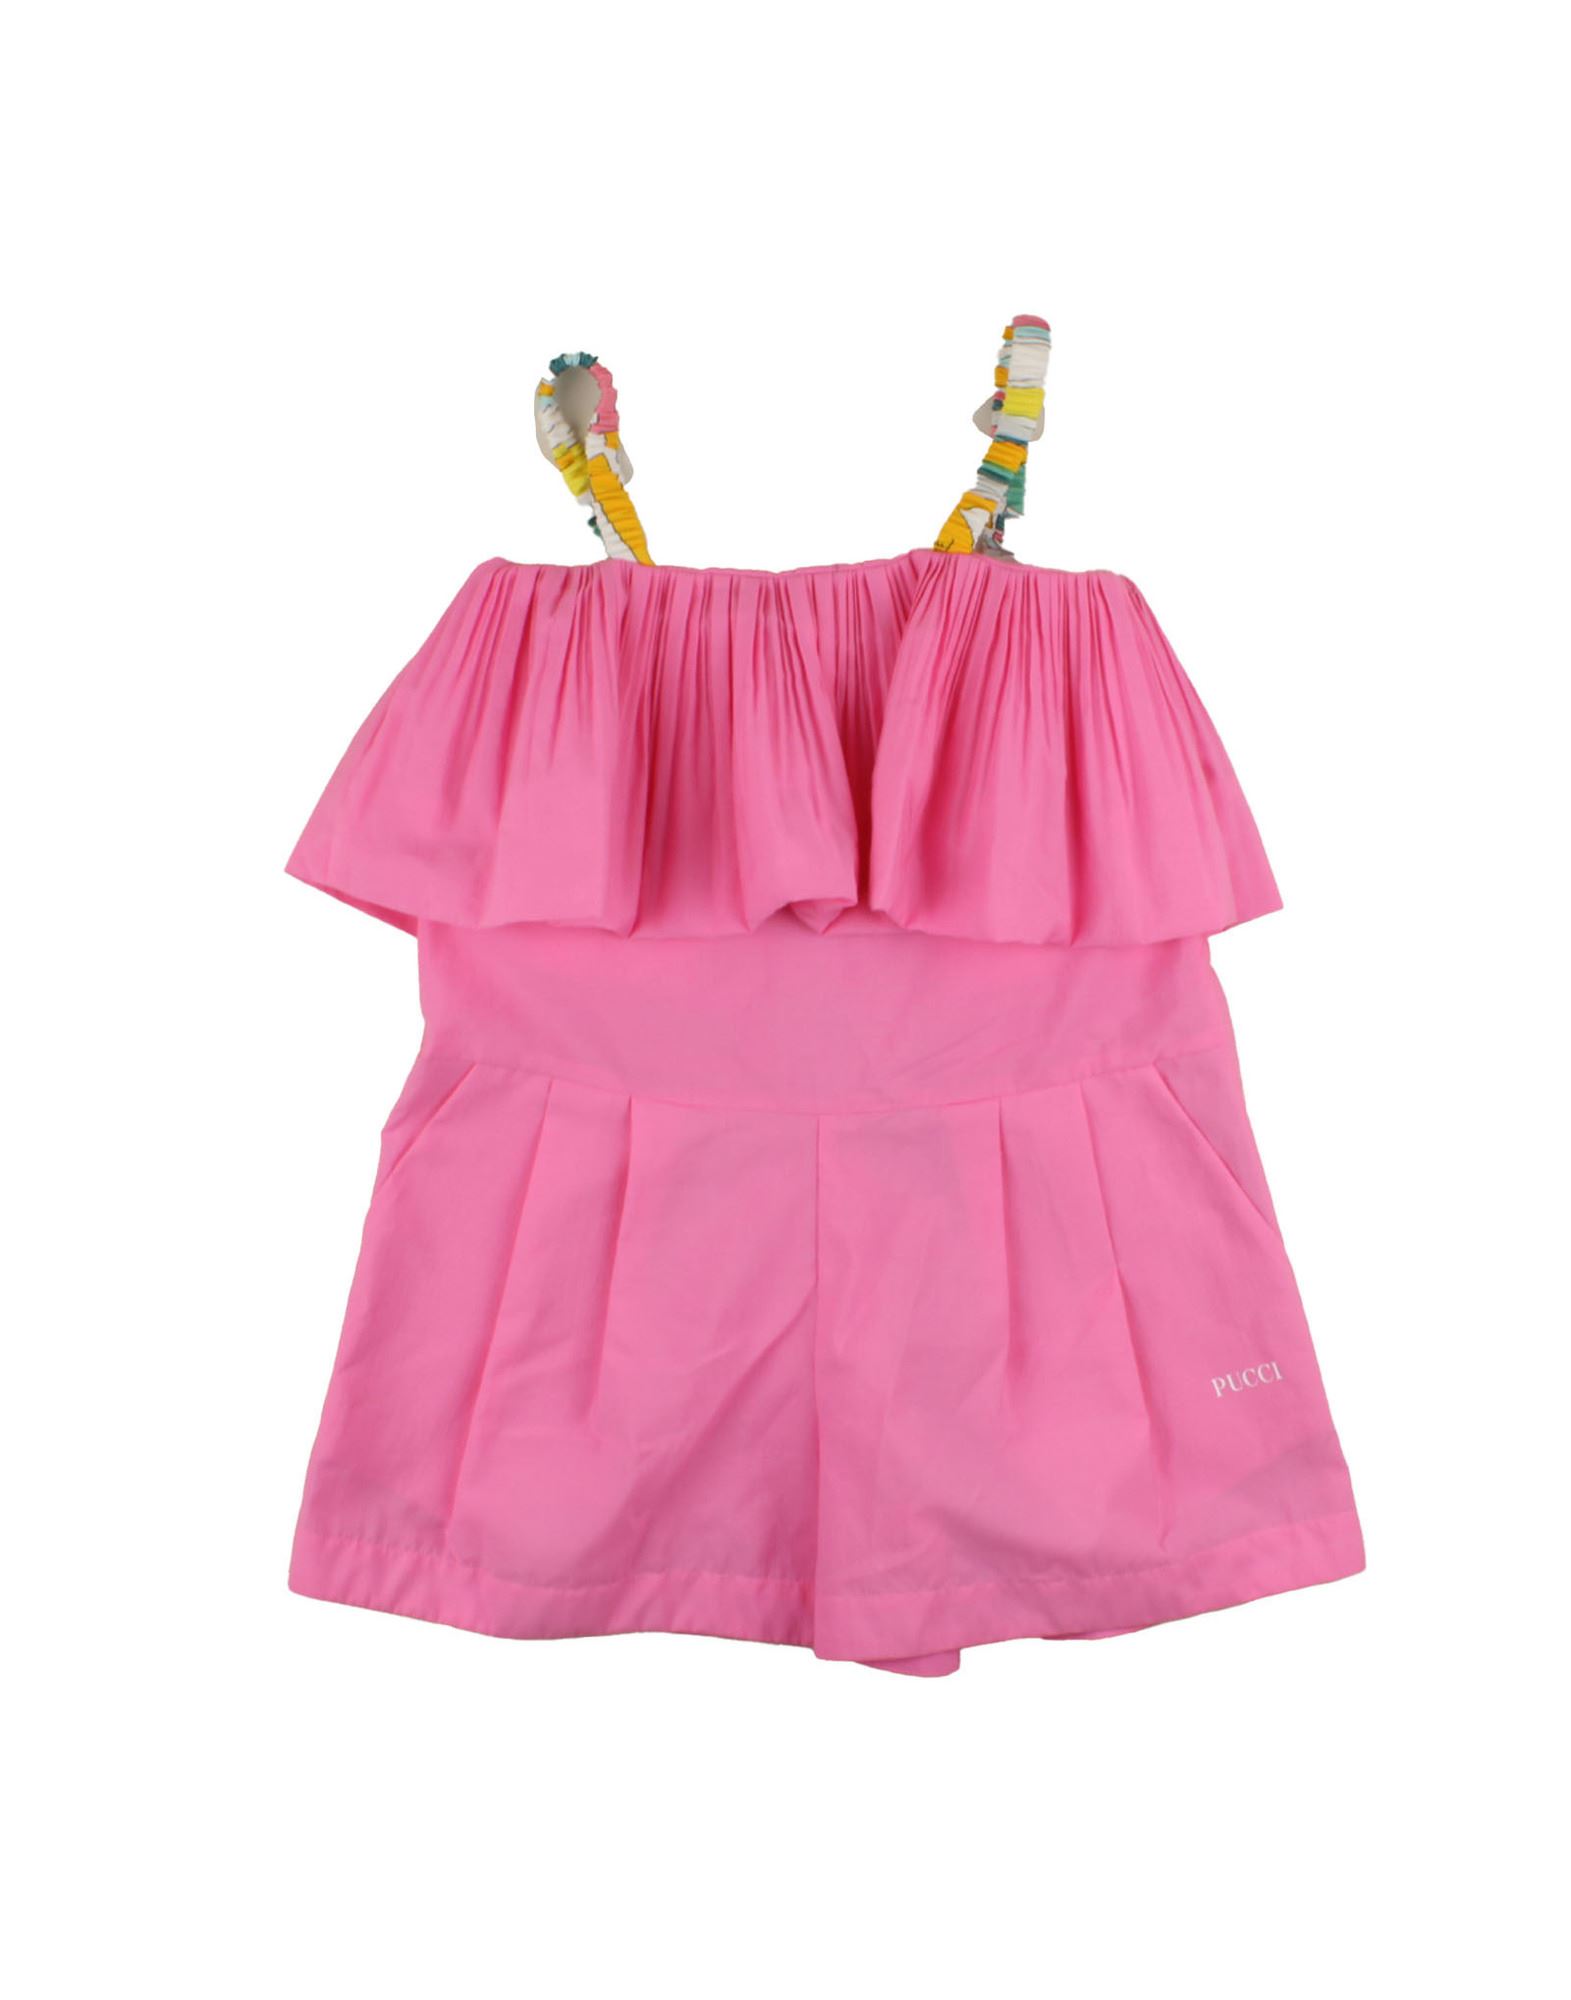 PUCCI Langer Overall Kinder Rosa von PUCCI